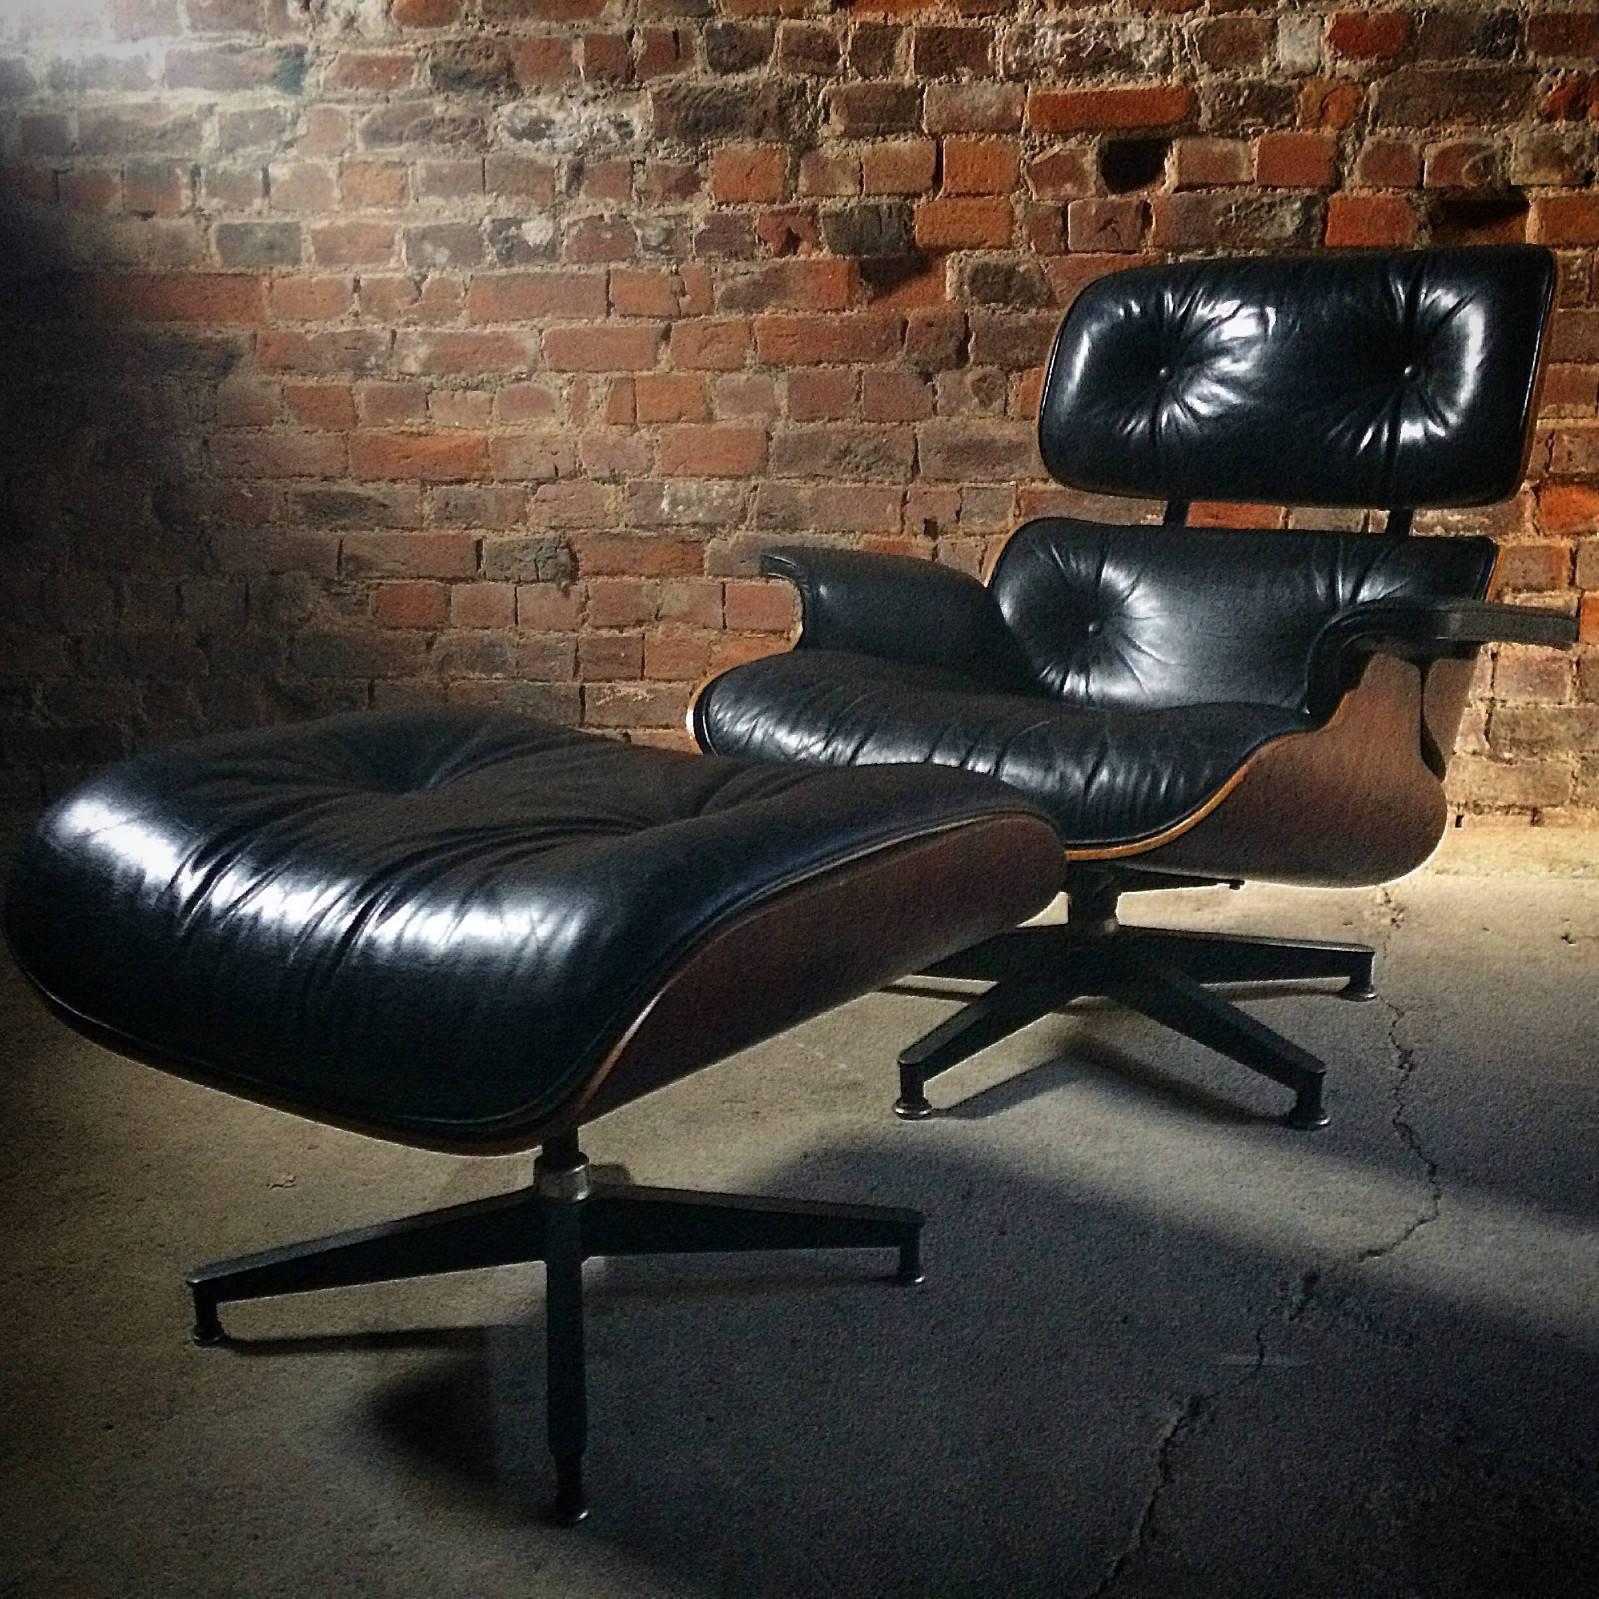 Original Herman Miller Eames designed 670 lounge chair and matching 671 ottoman in rosewood with black leather upholstery, the set was purchased in 1974 by the prominent artist Anthony Fry.

Charles & Ray Eames wanted their lounge chair and